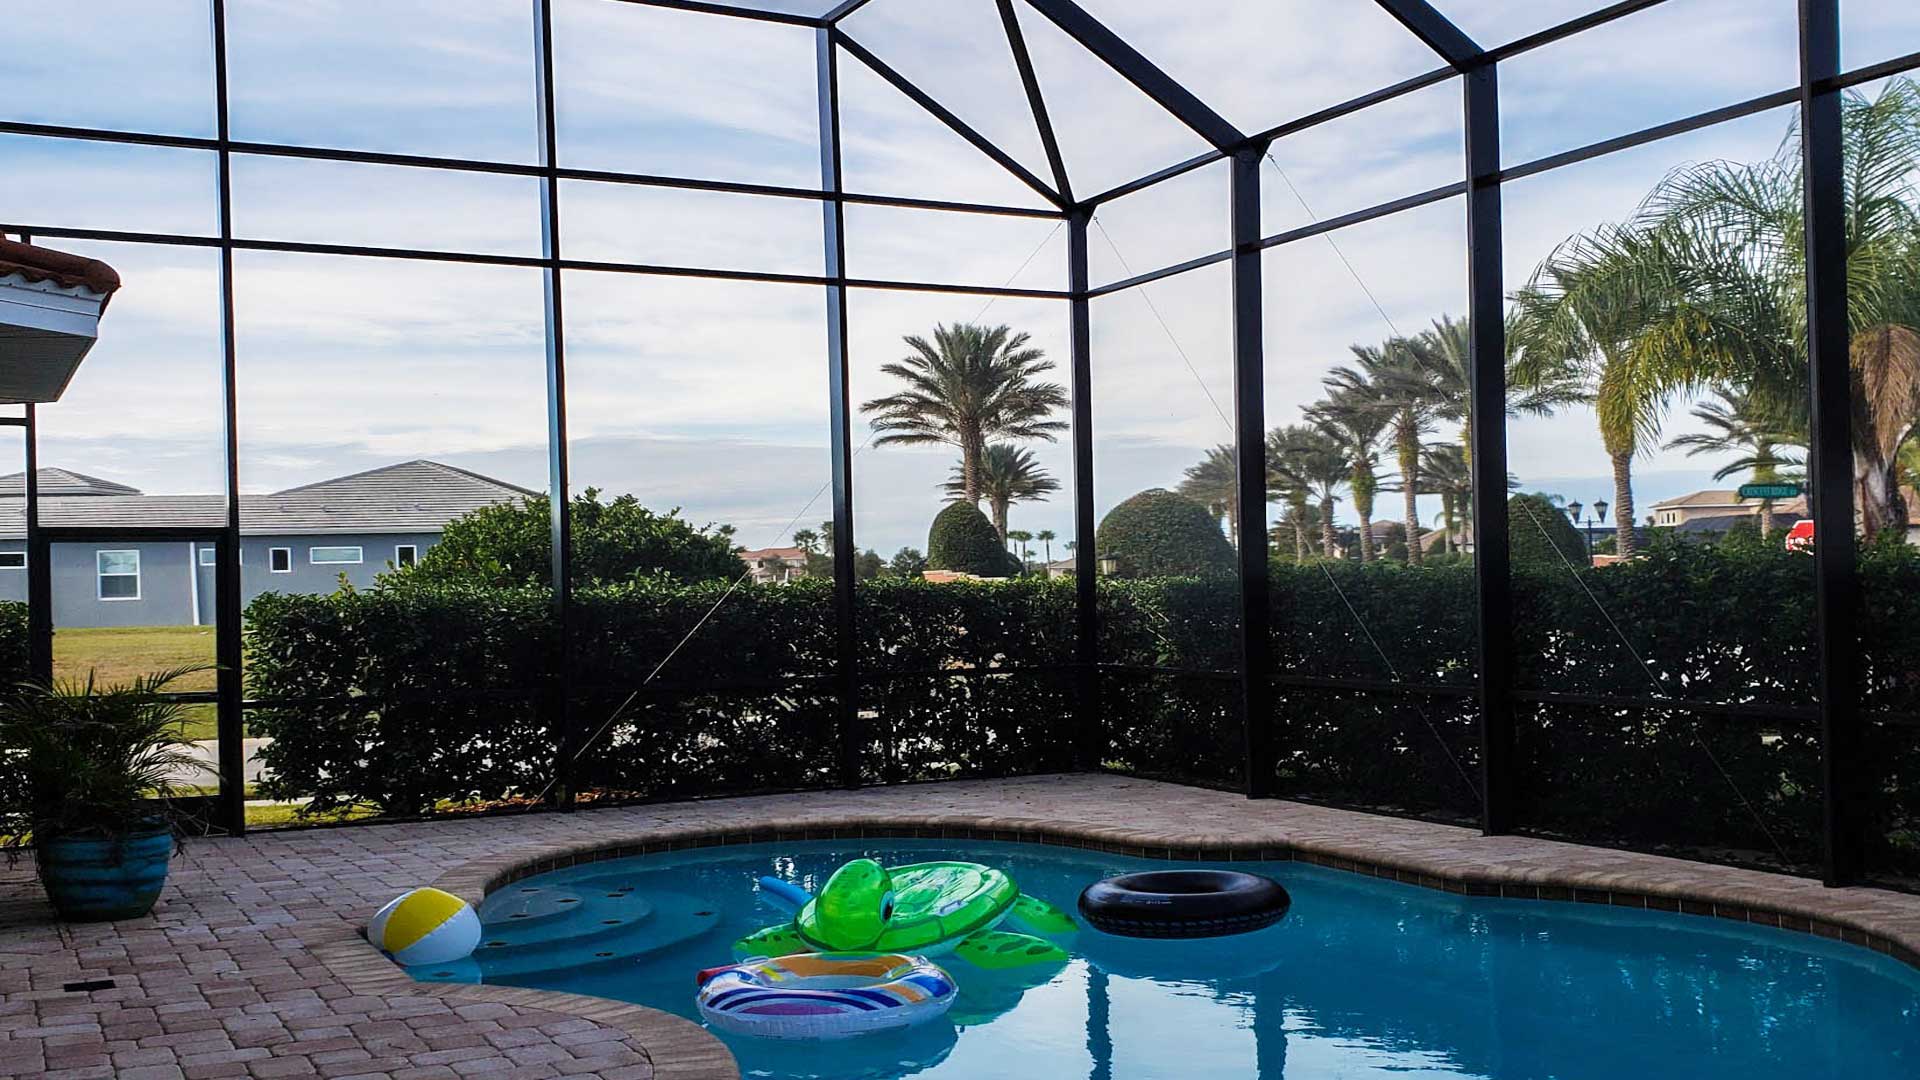 Two story pool cage at a large home in Lakeland, FL.